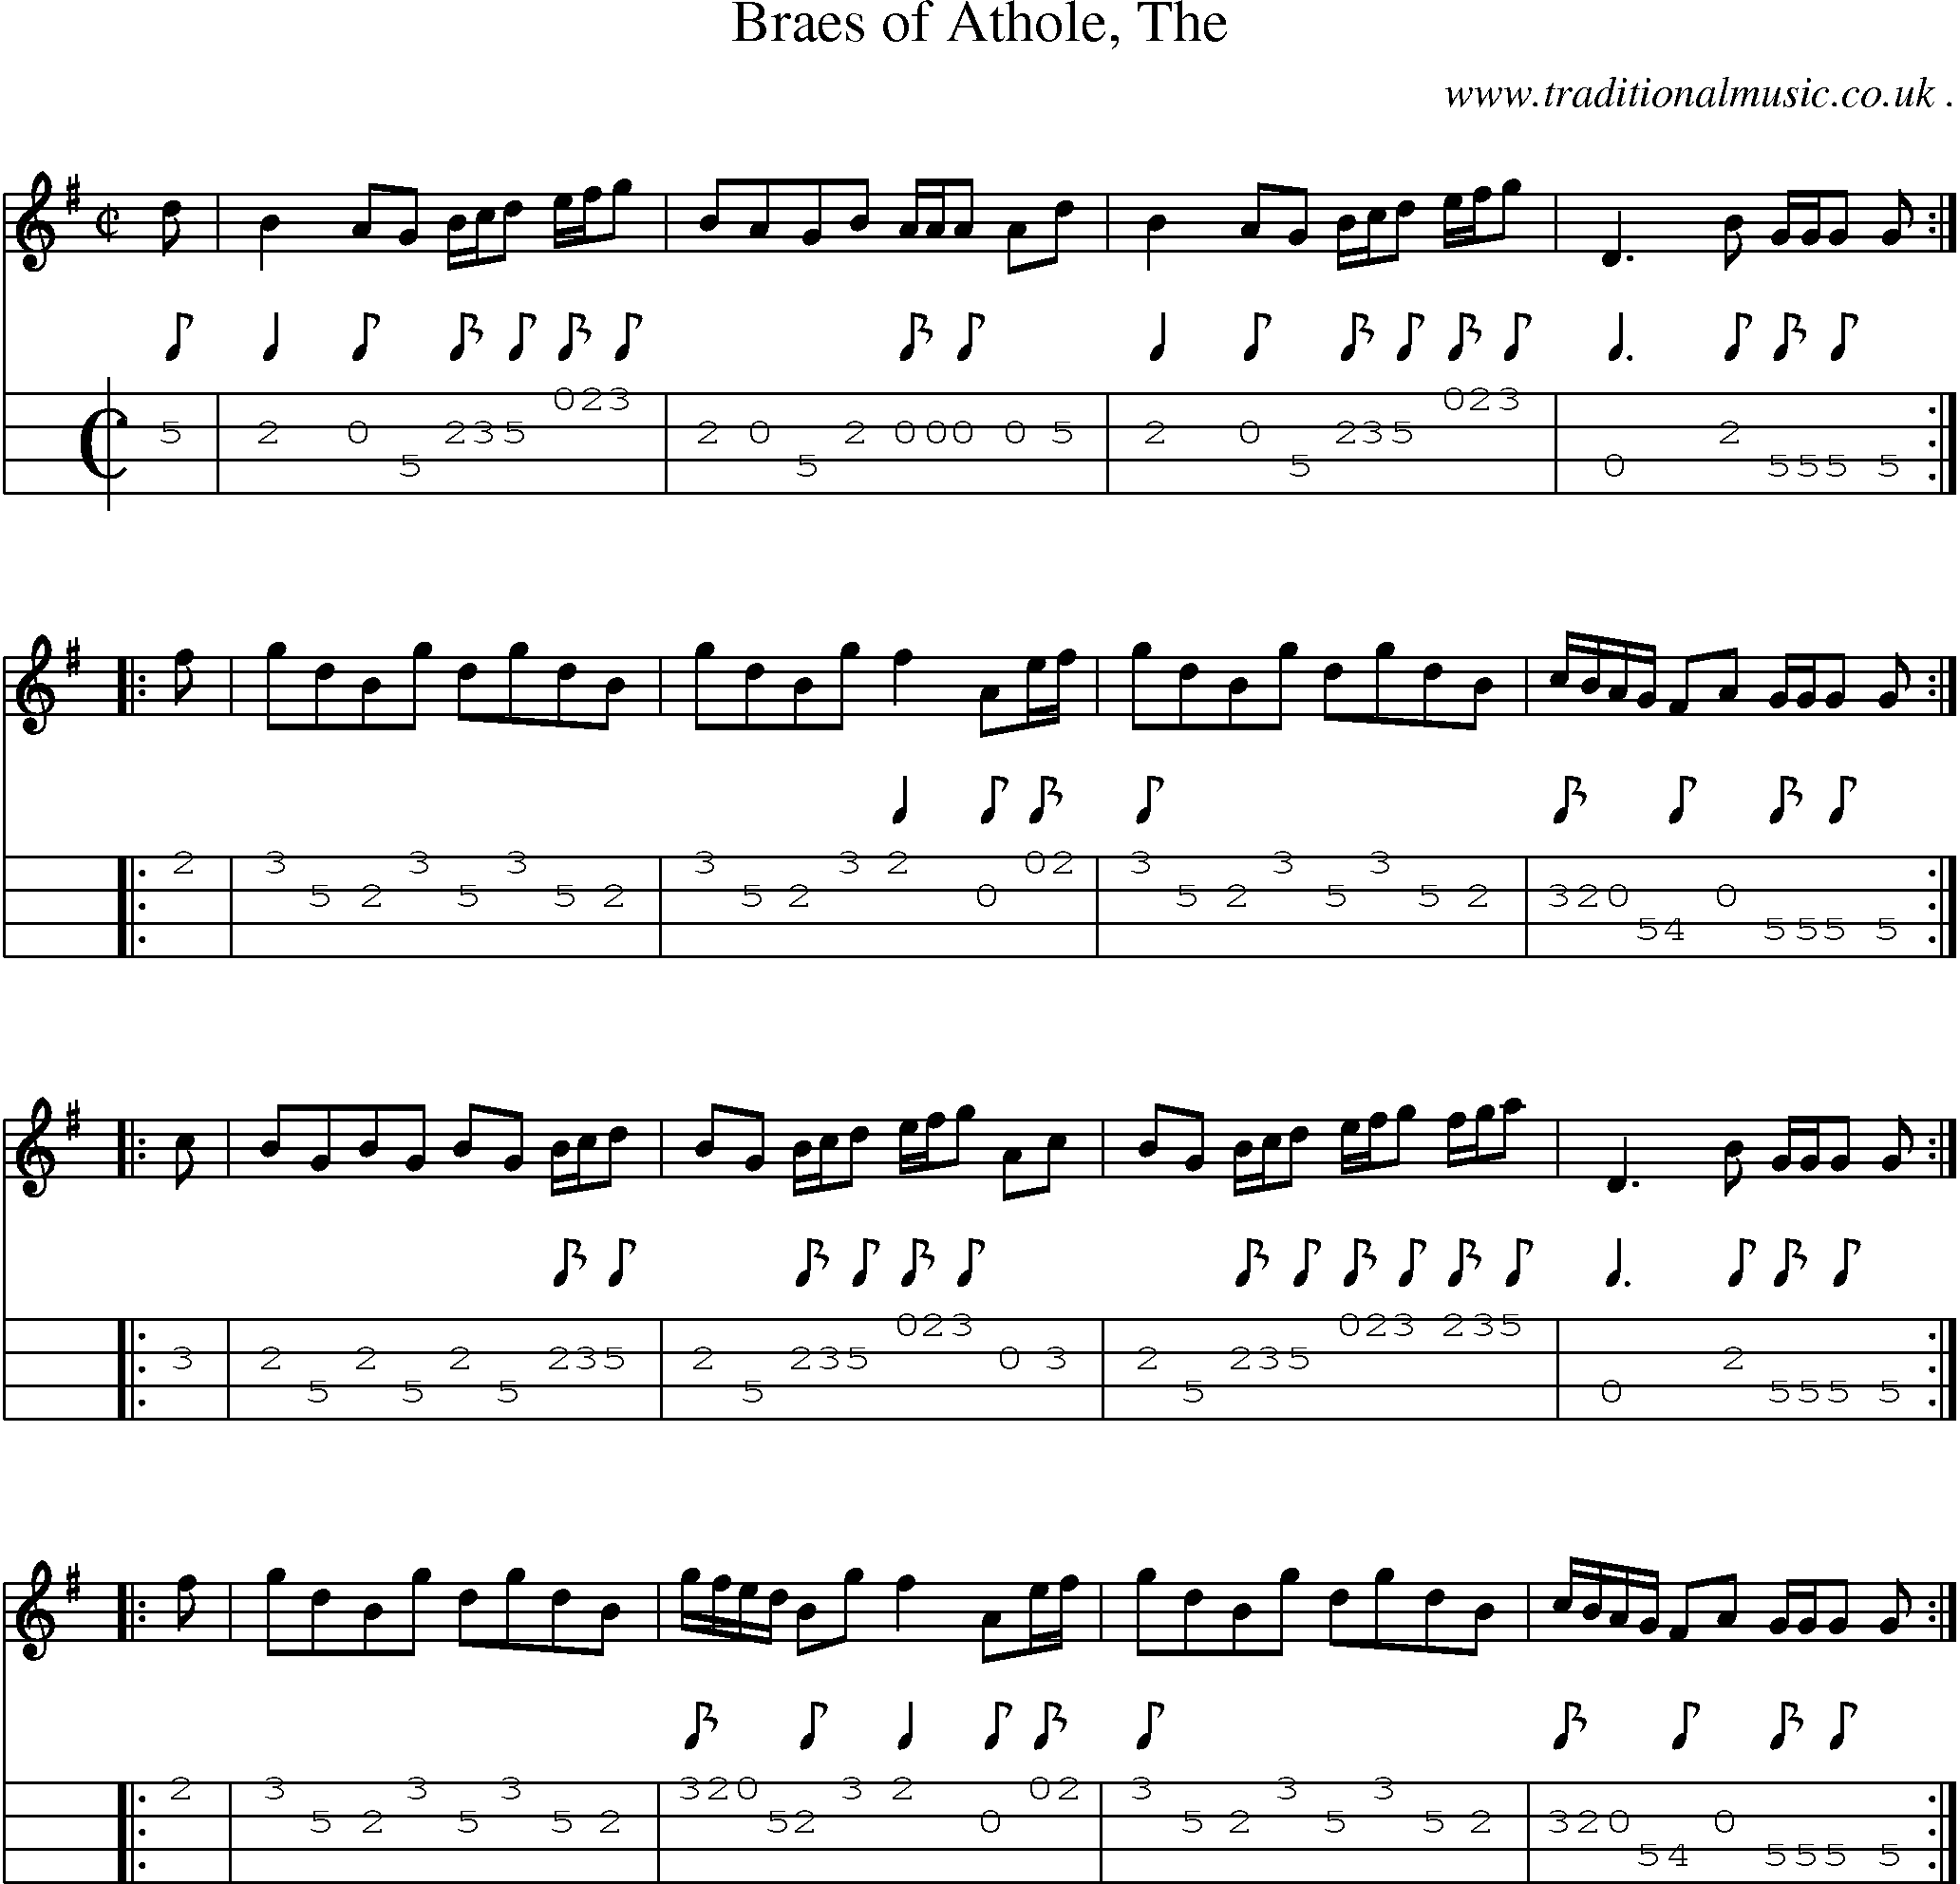 Sheet-music  score, Chords and Mandolin Tabs for Braes Of Athole The